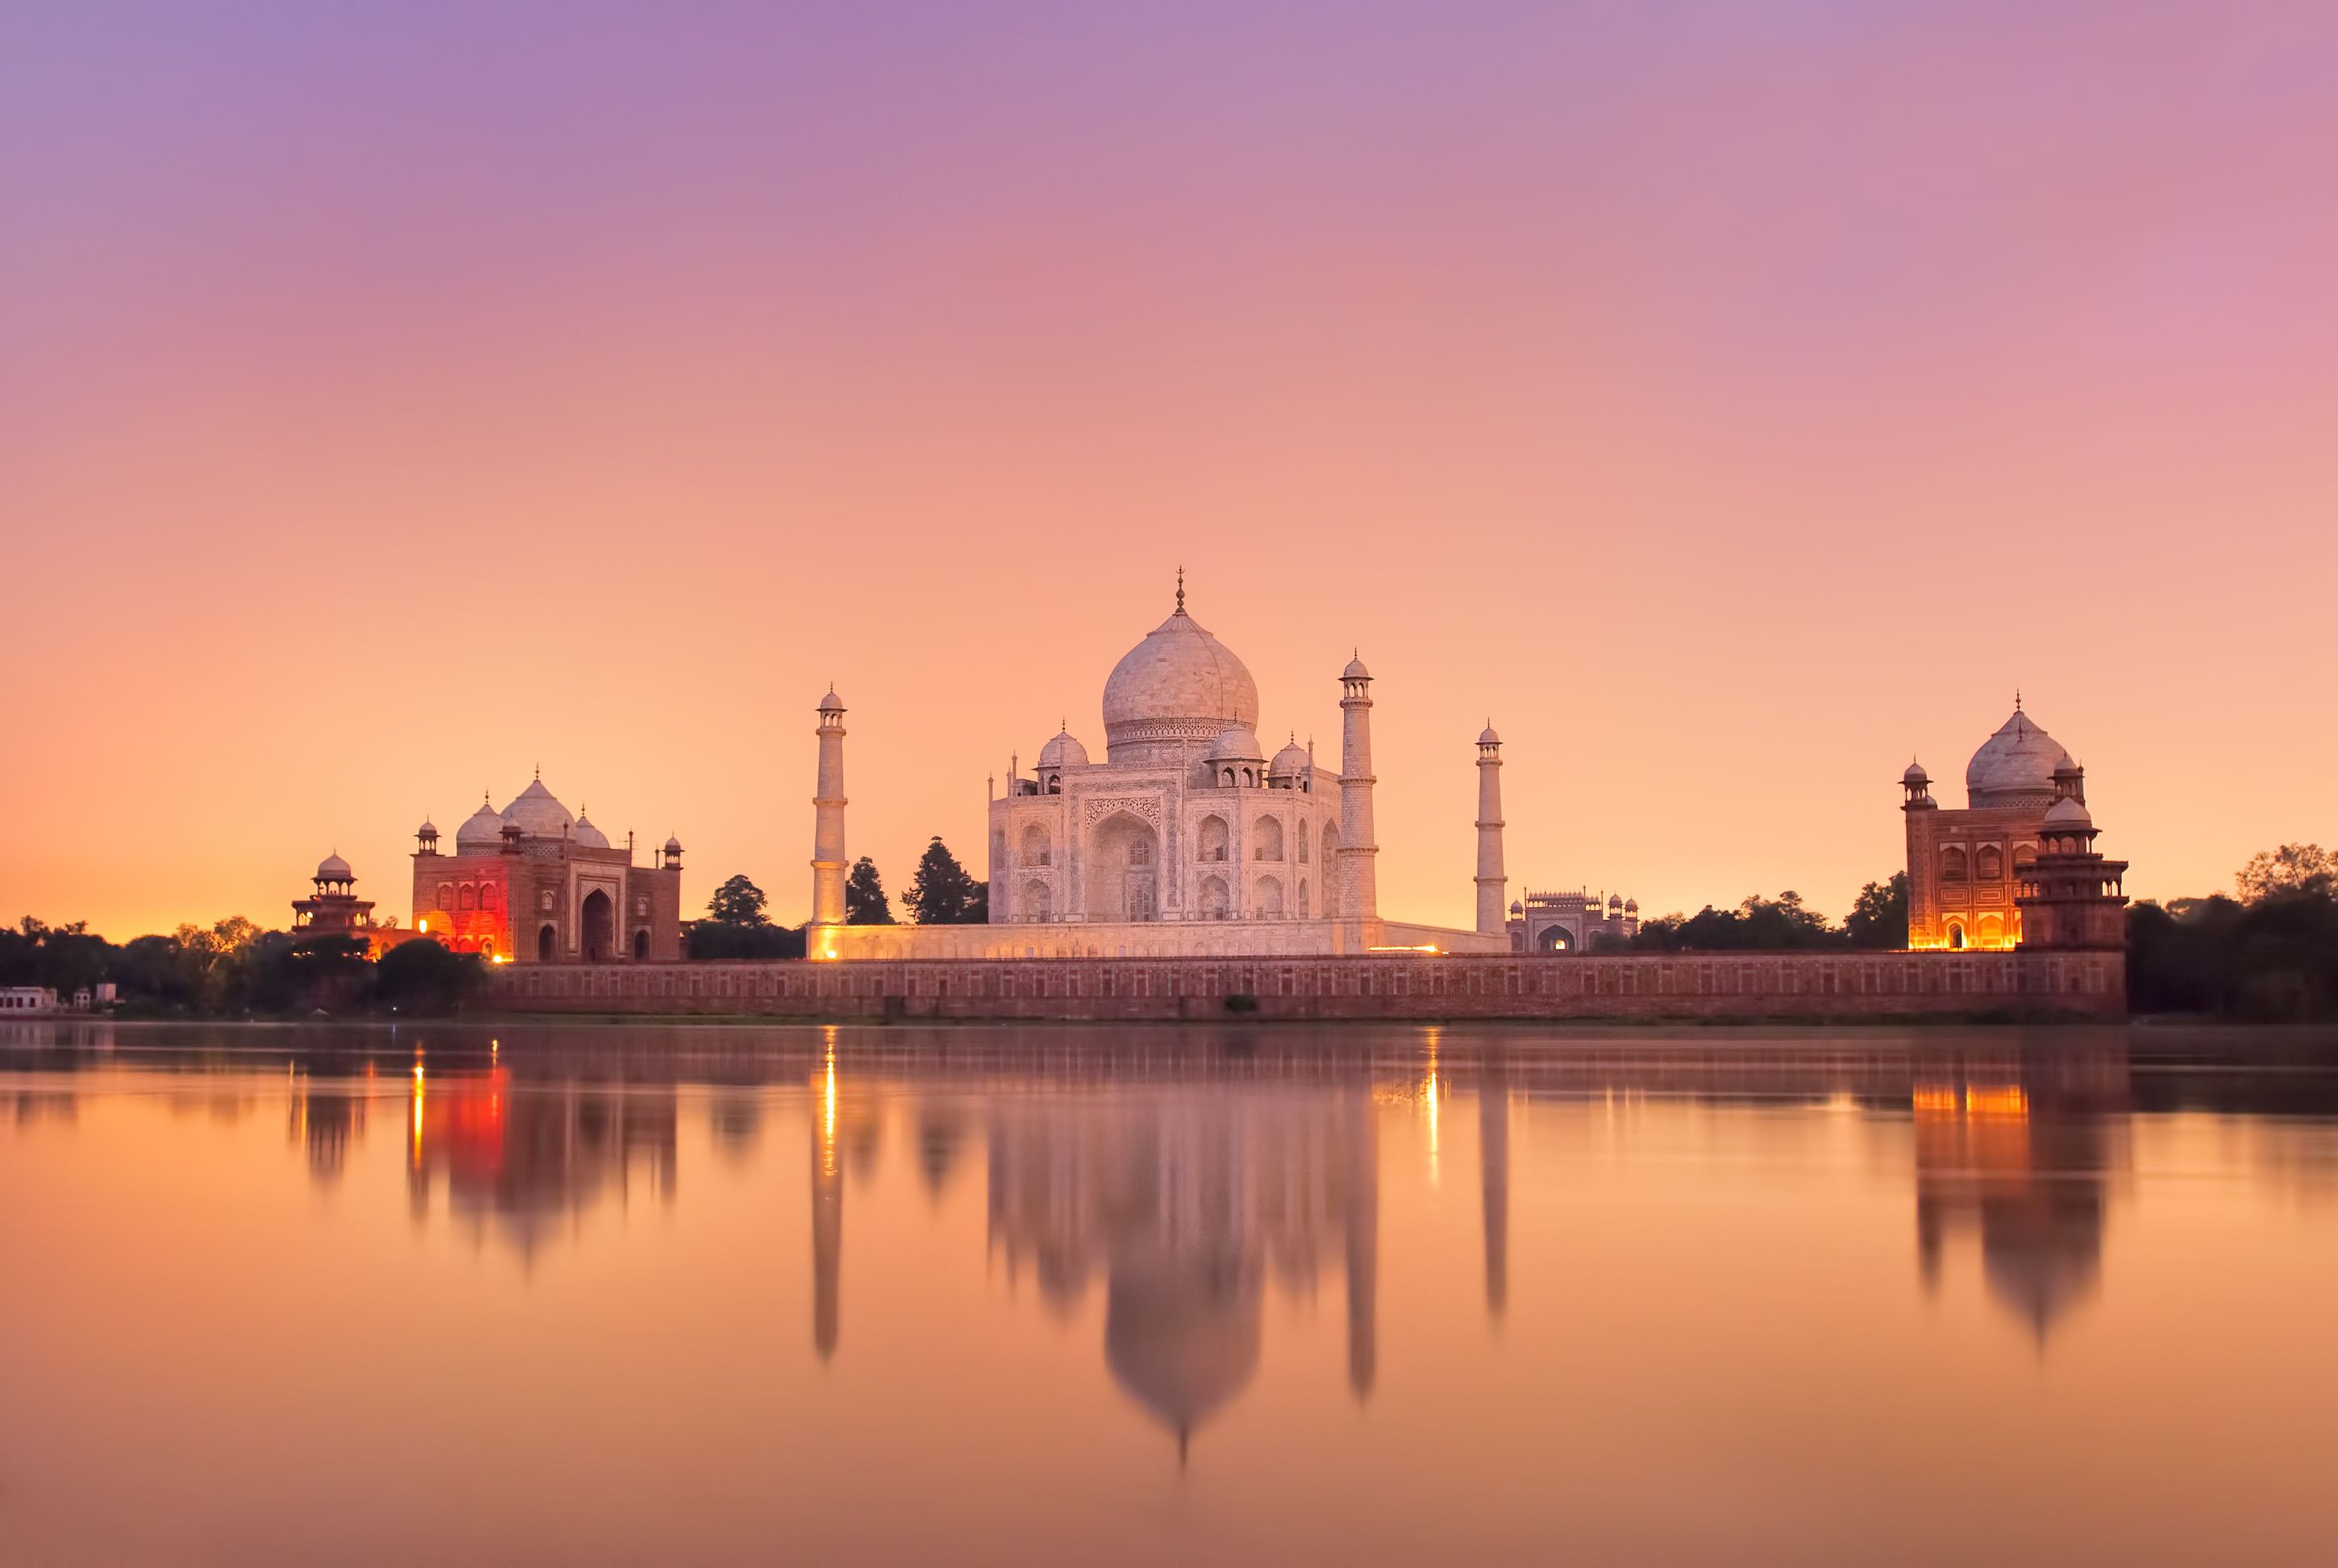 <p><b>Average Star Review</b>: 4.864</p><p>The Taj Mahal in India is stunning at sunrise, but if you're a sunset person, the experience is equally magical. As the sun sets, the white marble of the Taj glows with warm, golden hues. The lush gardens and reflecting pools add to the breathtaking view.</p>